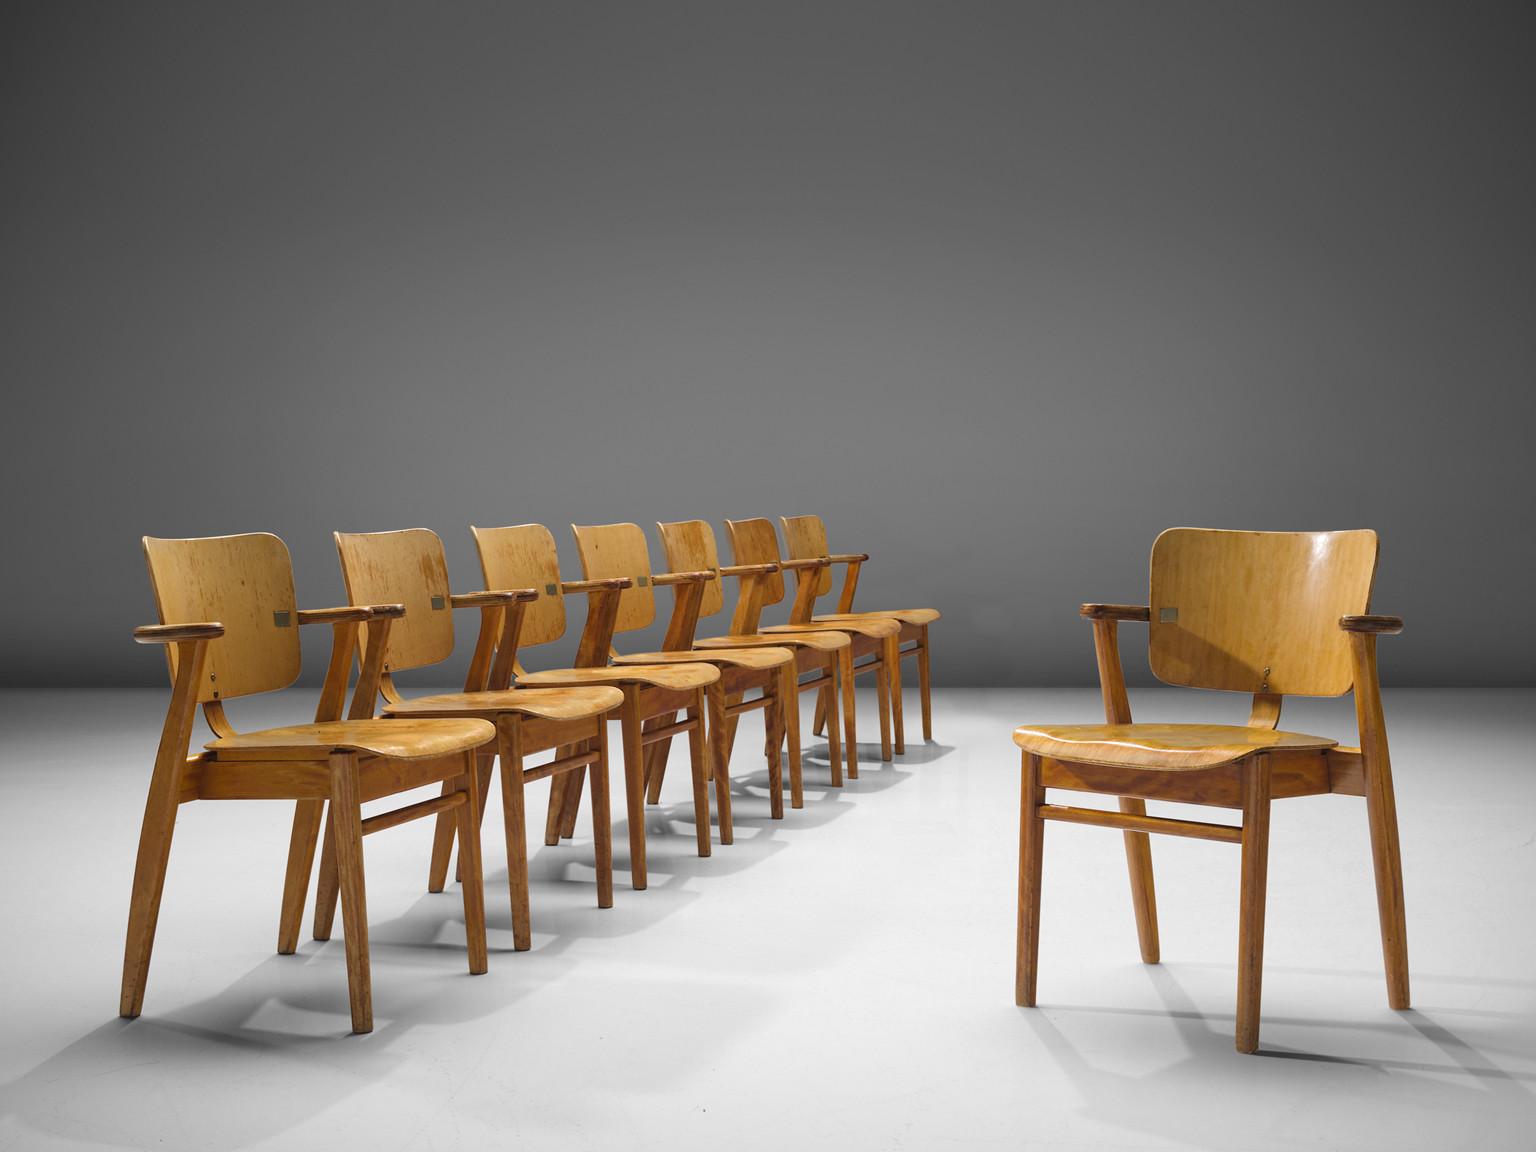 Ilmari Tapiovaara, set of eight 'Domus' armchairs, mahogany, metal, Finland, design 1953.

This is a wonderful set of eight ‘Domus’ armchairs by Finnish designer Ilmari Tapiovaara. The frame is made of solid mahogany. Back and seating from laminated